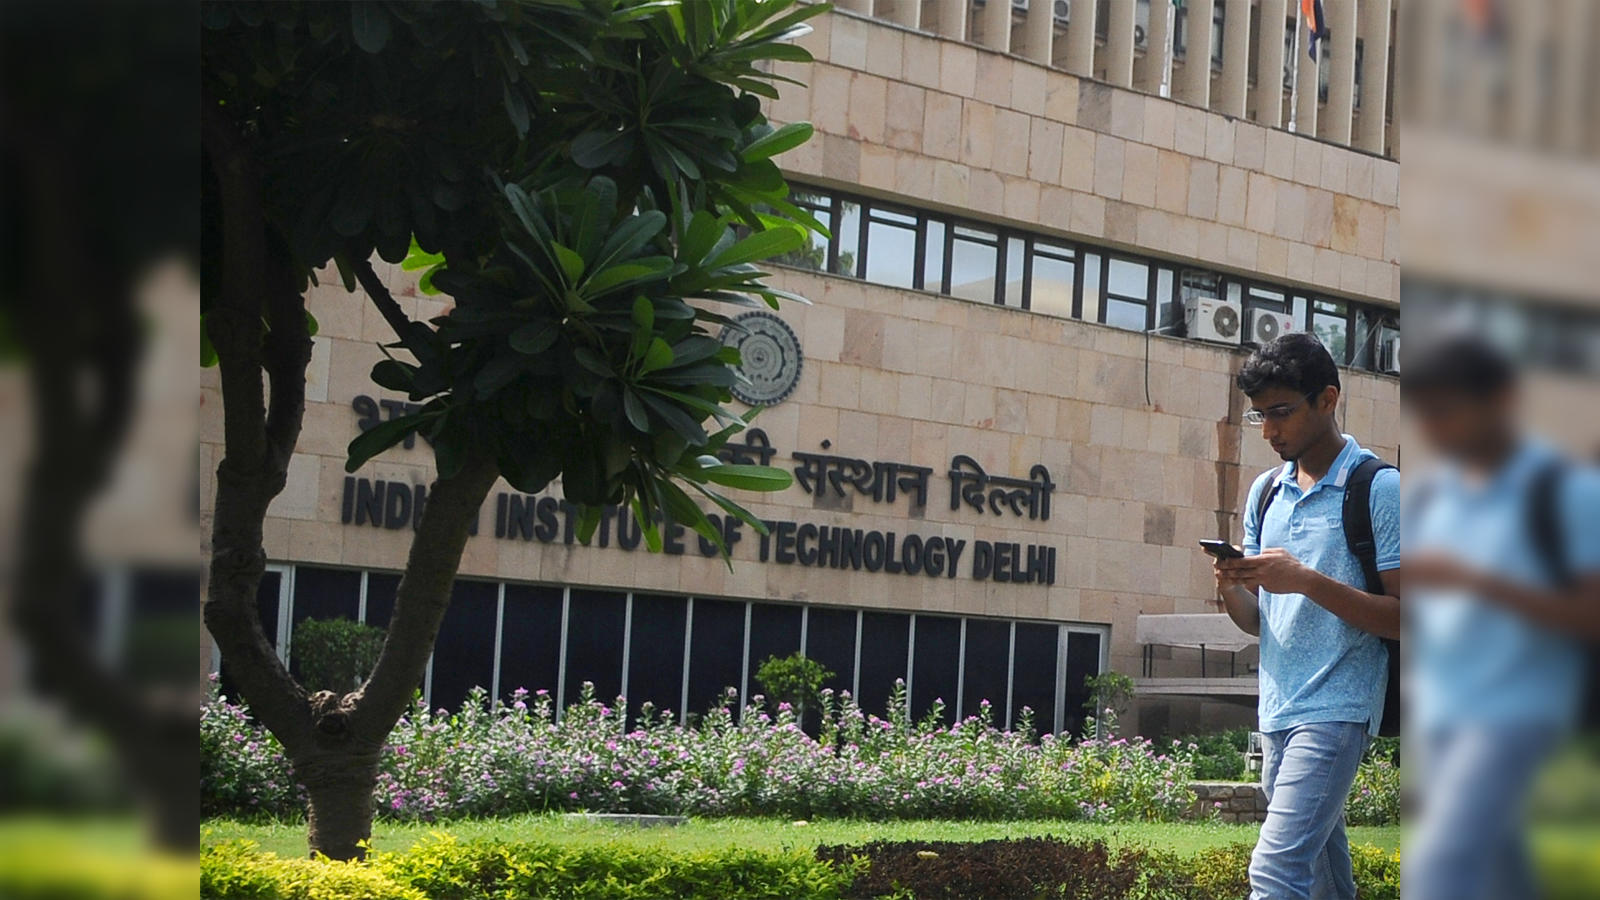 PhD in Psychology & M. Sc in Cognitive Science Admission Open at IIT Delhi  - UPS Education